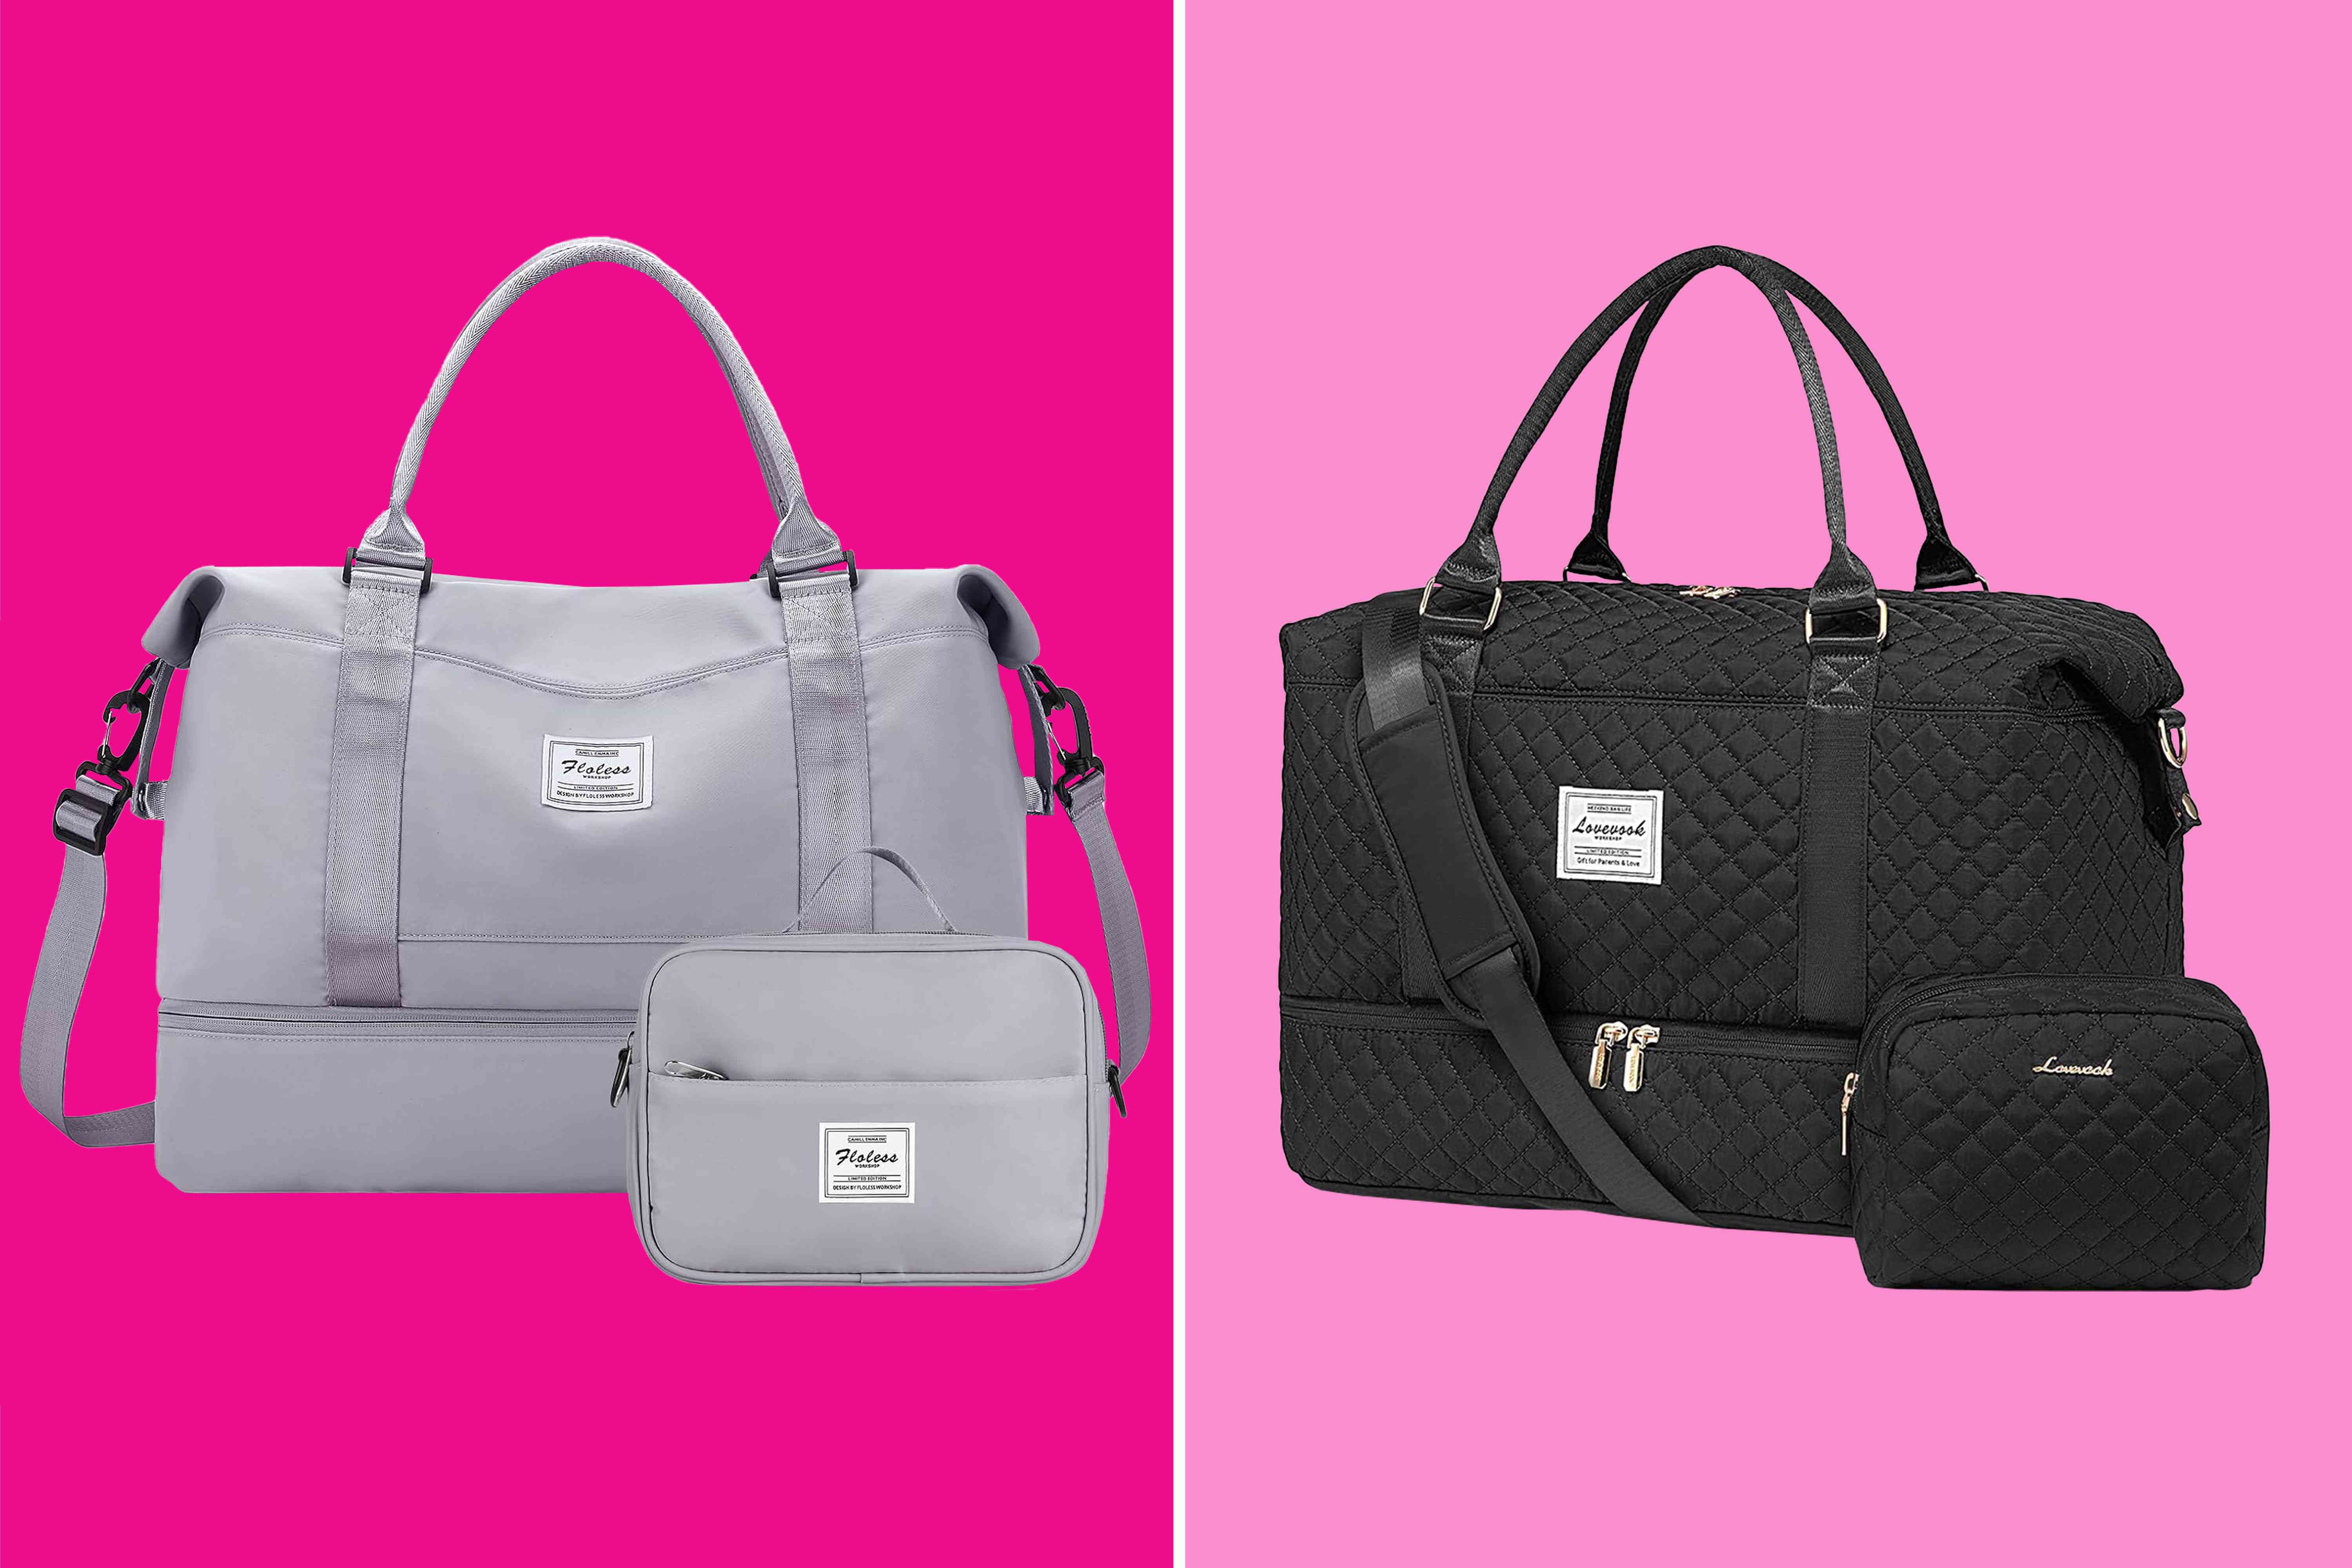 Overpackers Swear by These Spacious Weekender Bags That Hold 'Everything and More,' and They Start at $24 on Amazon